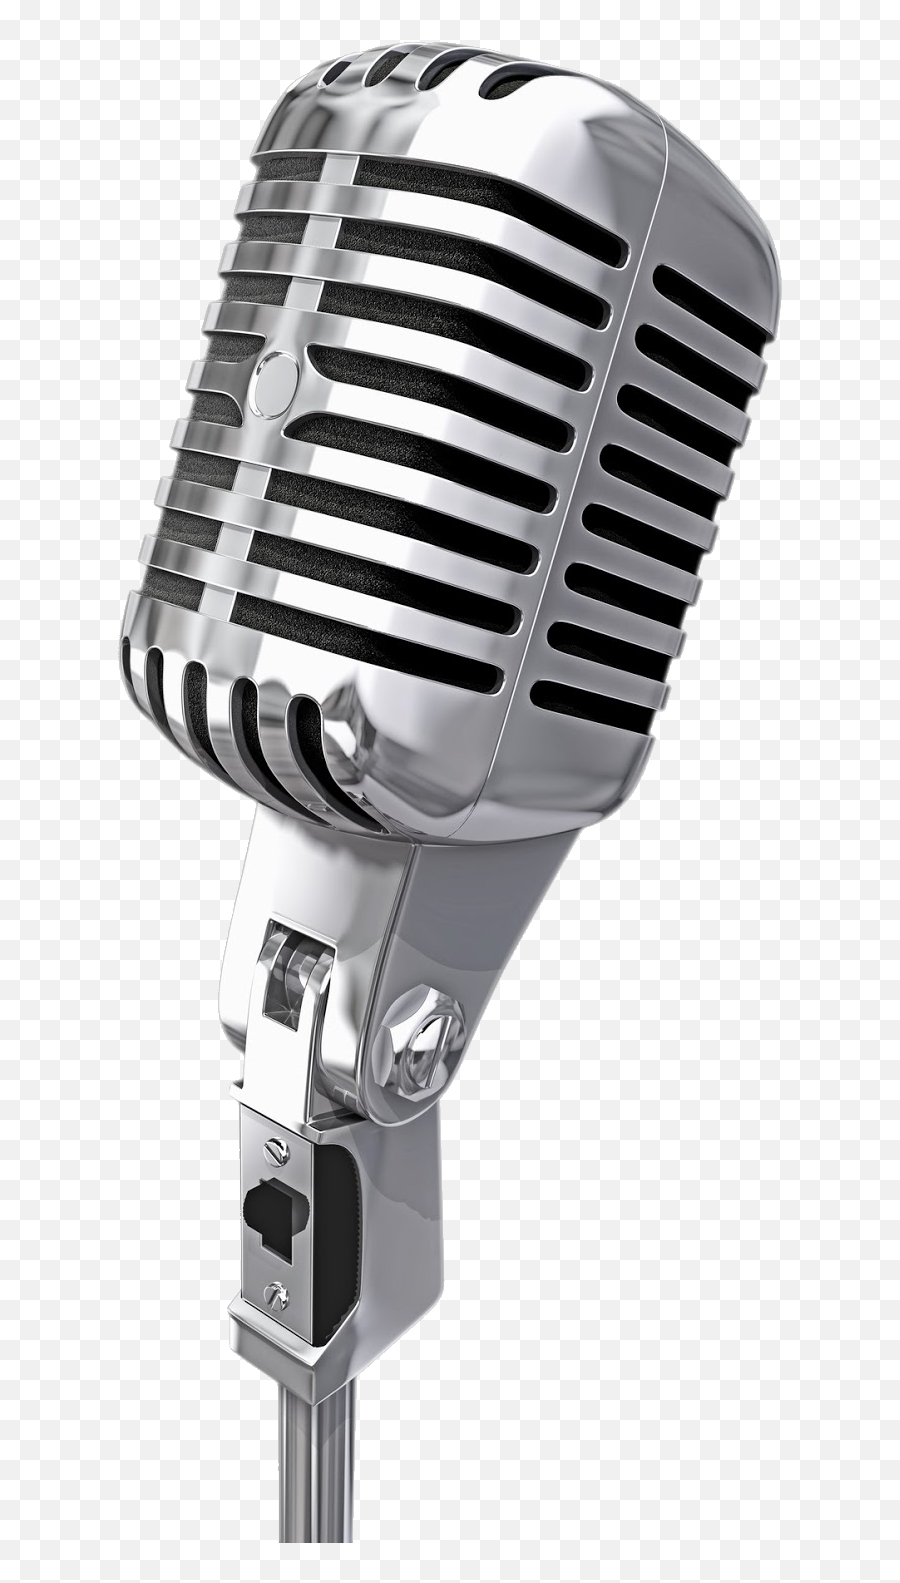 Microphone Png Image Download - Microphone Png,Microphone Clipart Transparent